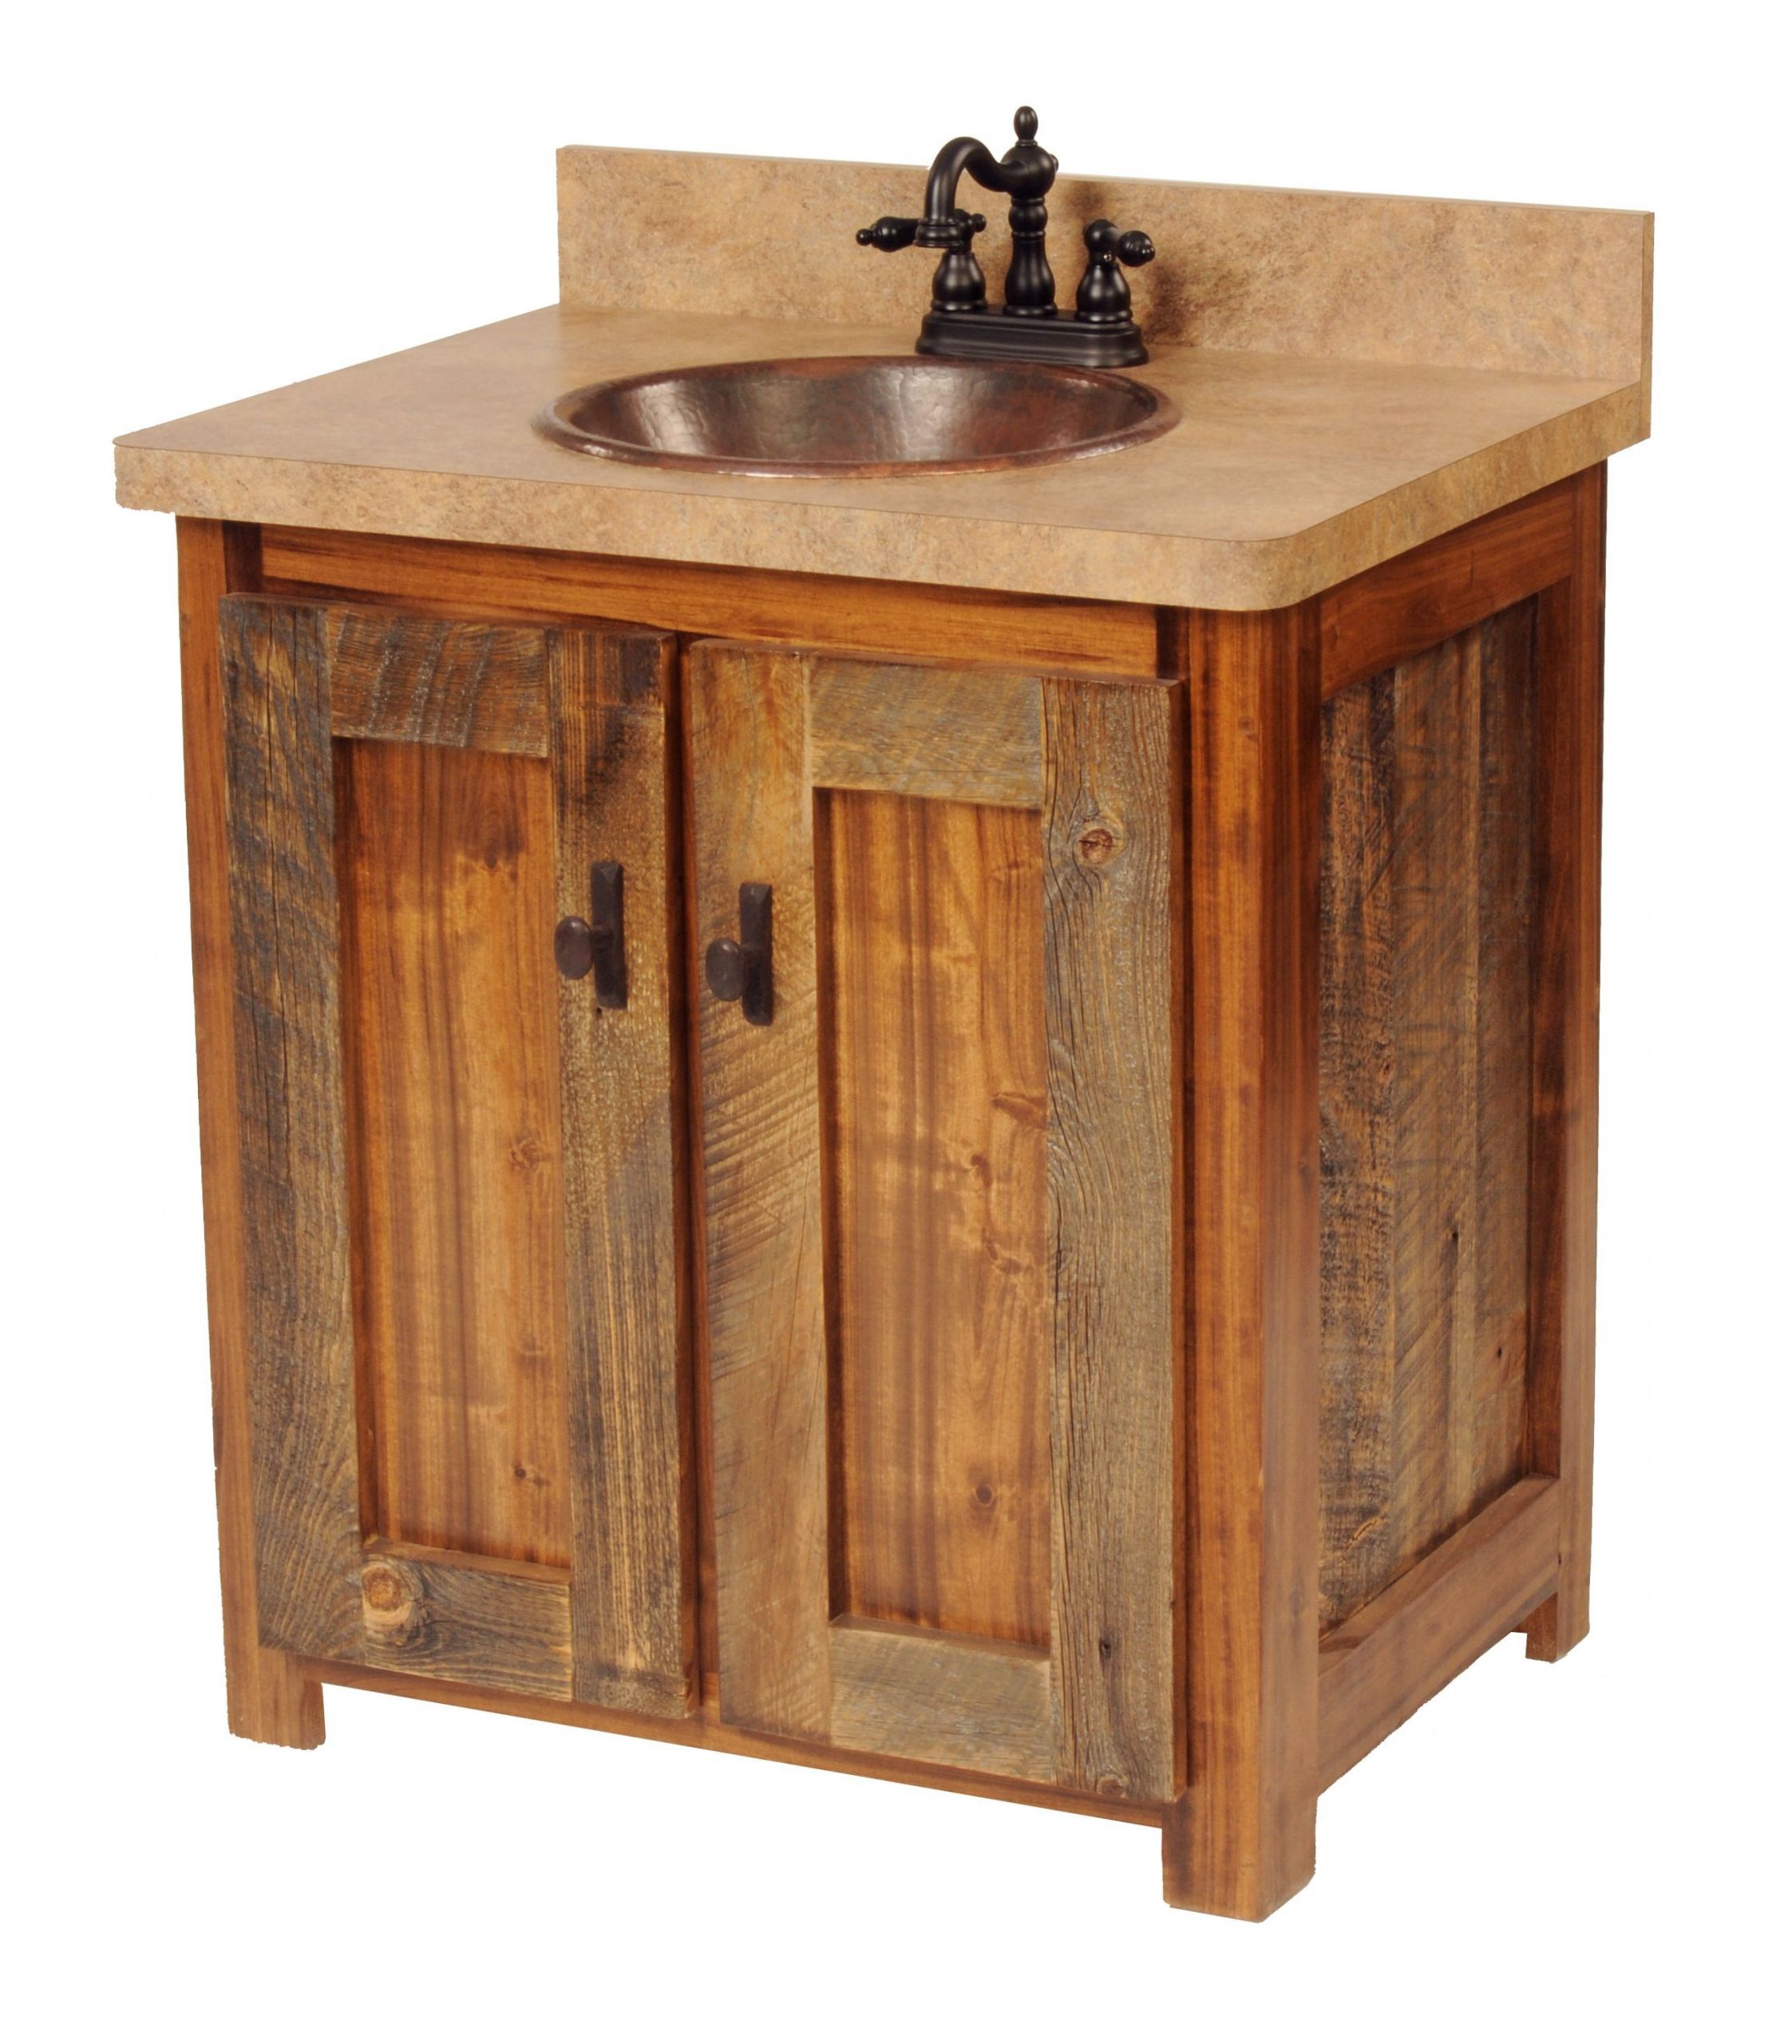 Country Bathroom Sinks
 The Wyoming Collection Bathroom Vanity Includes Base